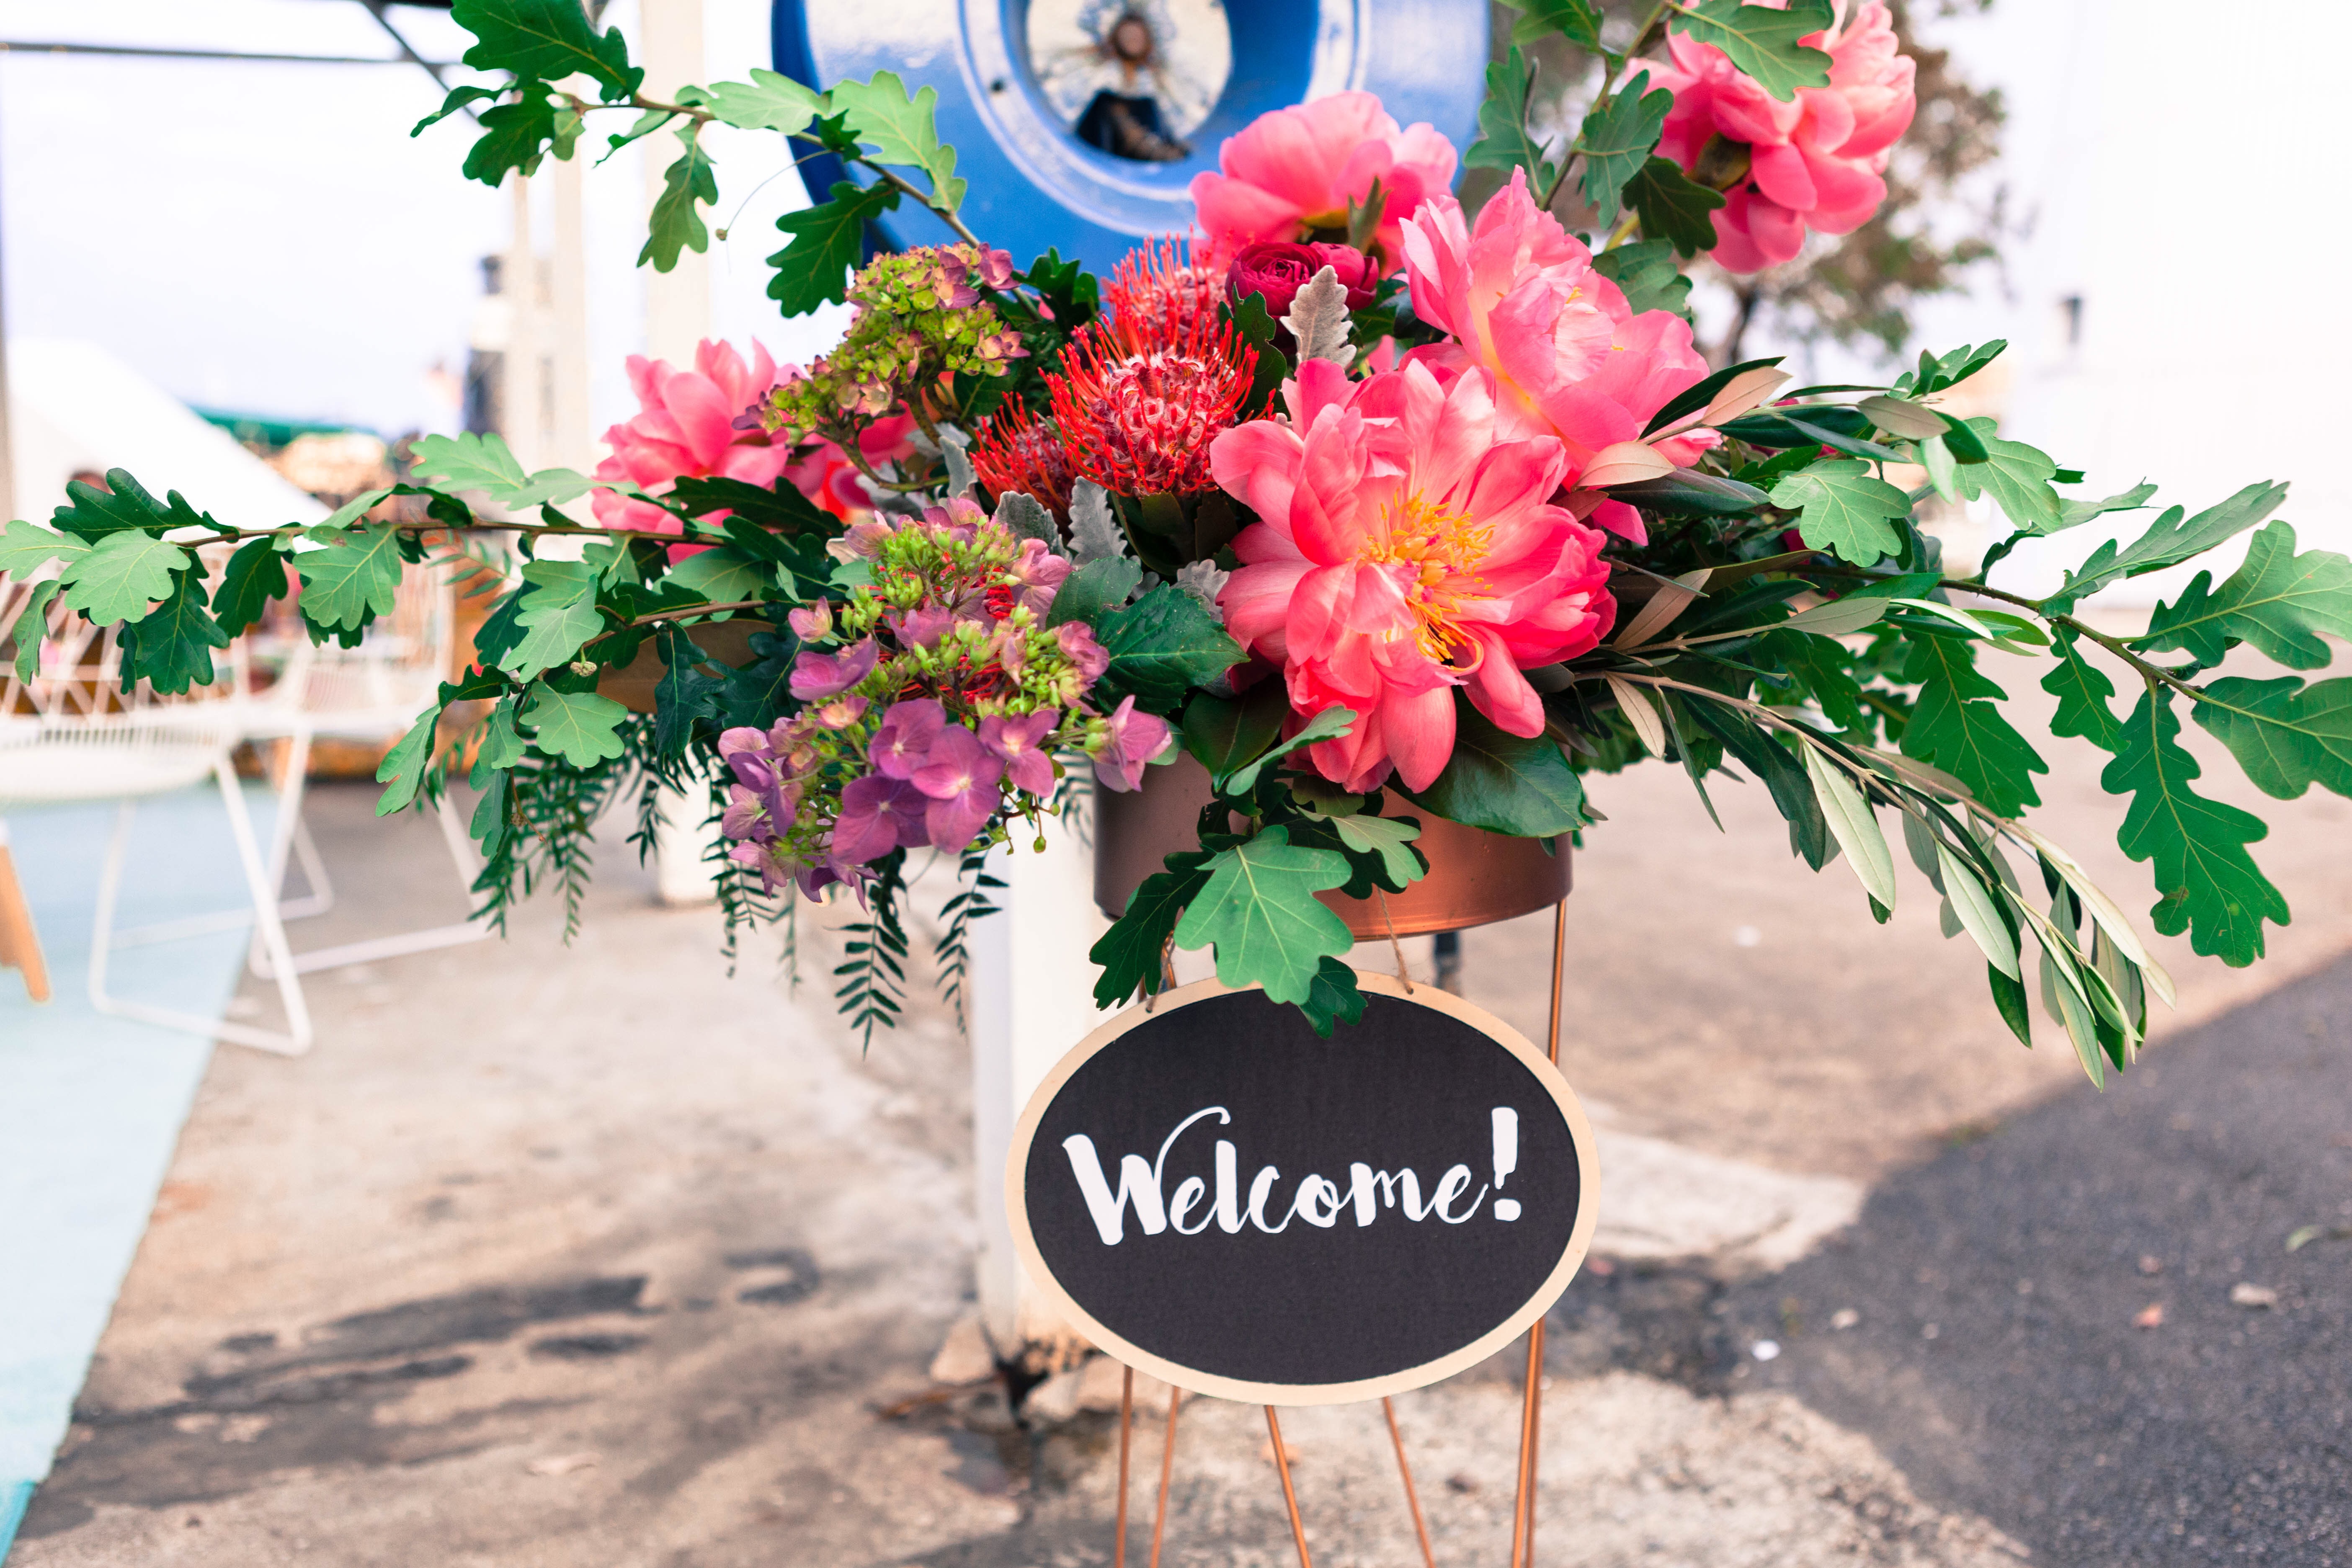 Flowers and a party welcome sign